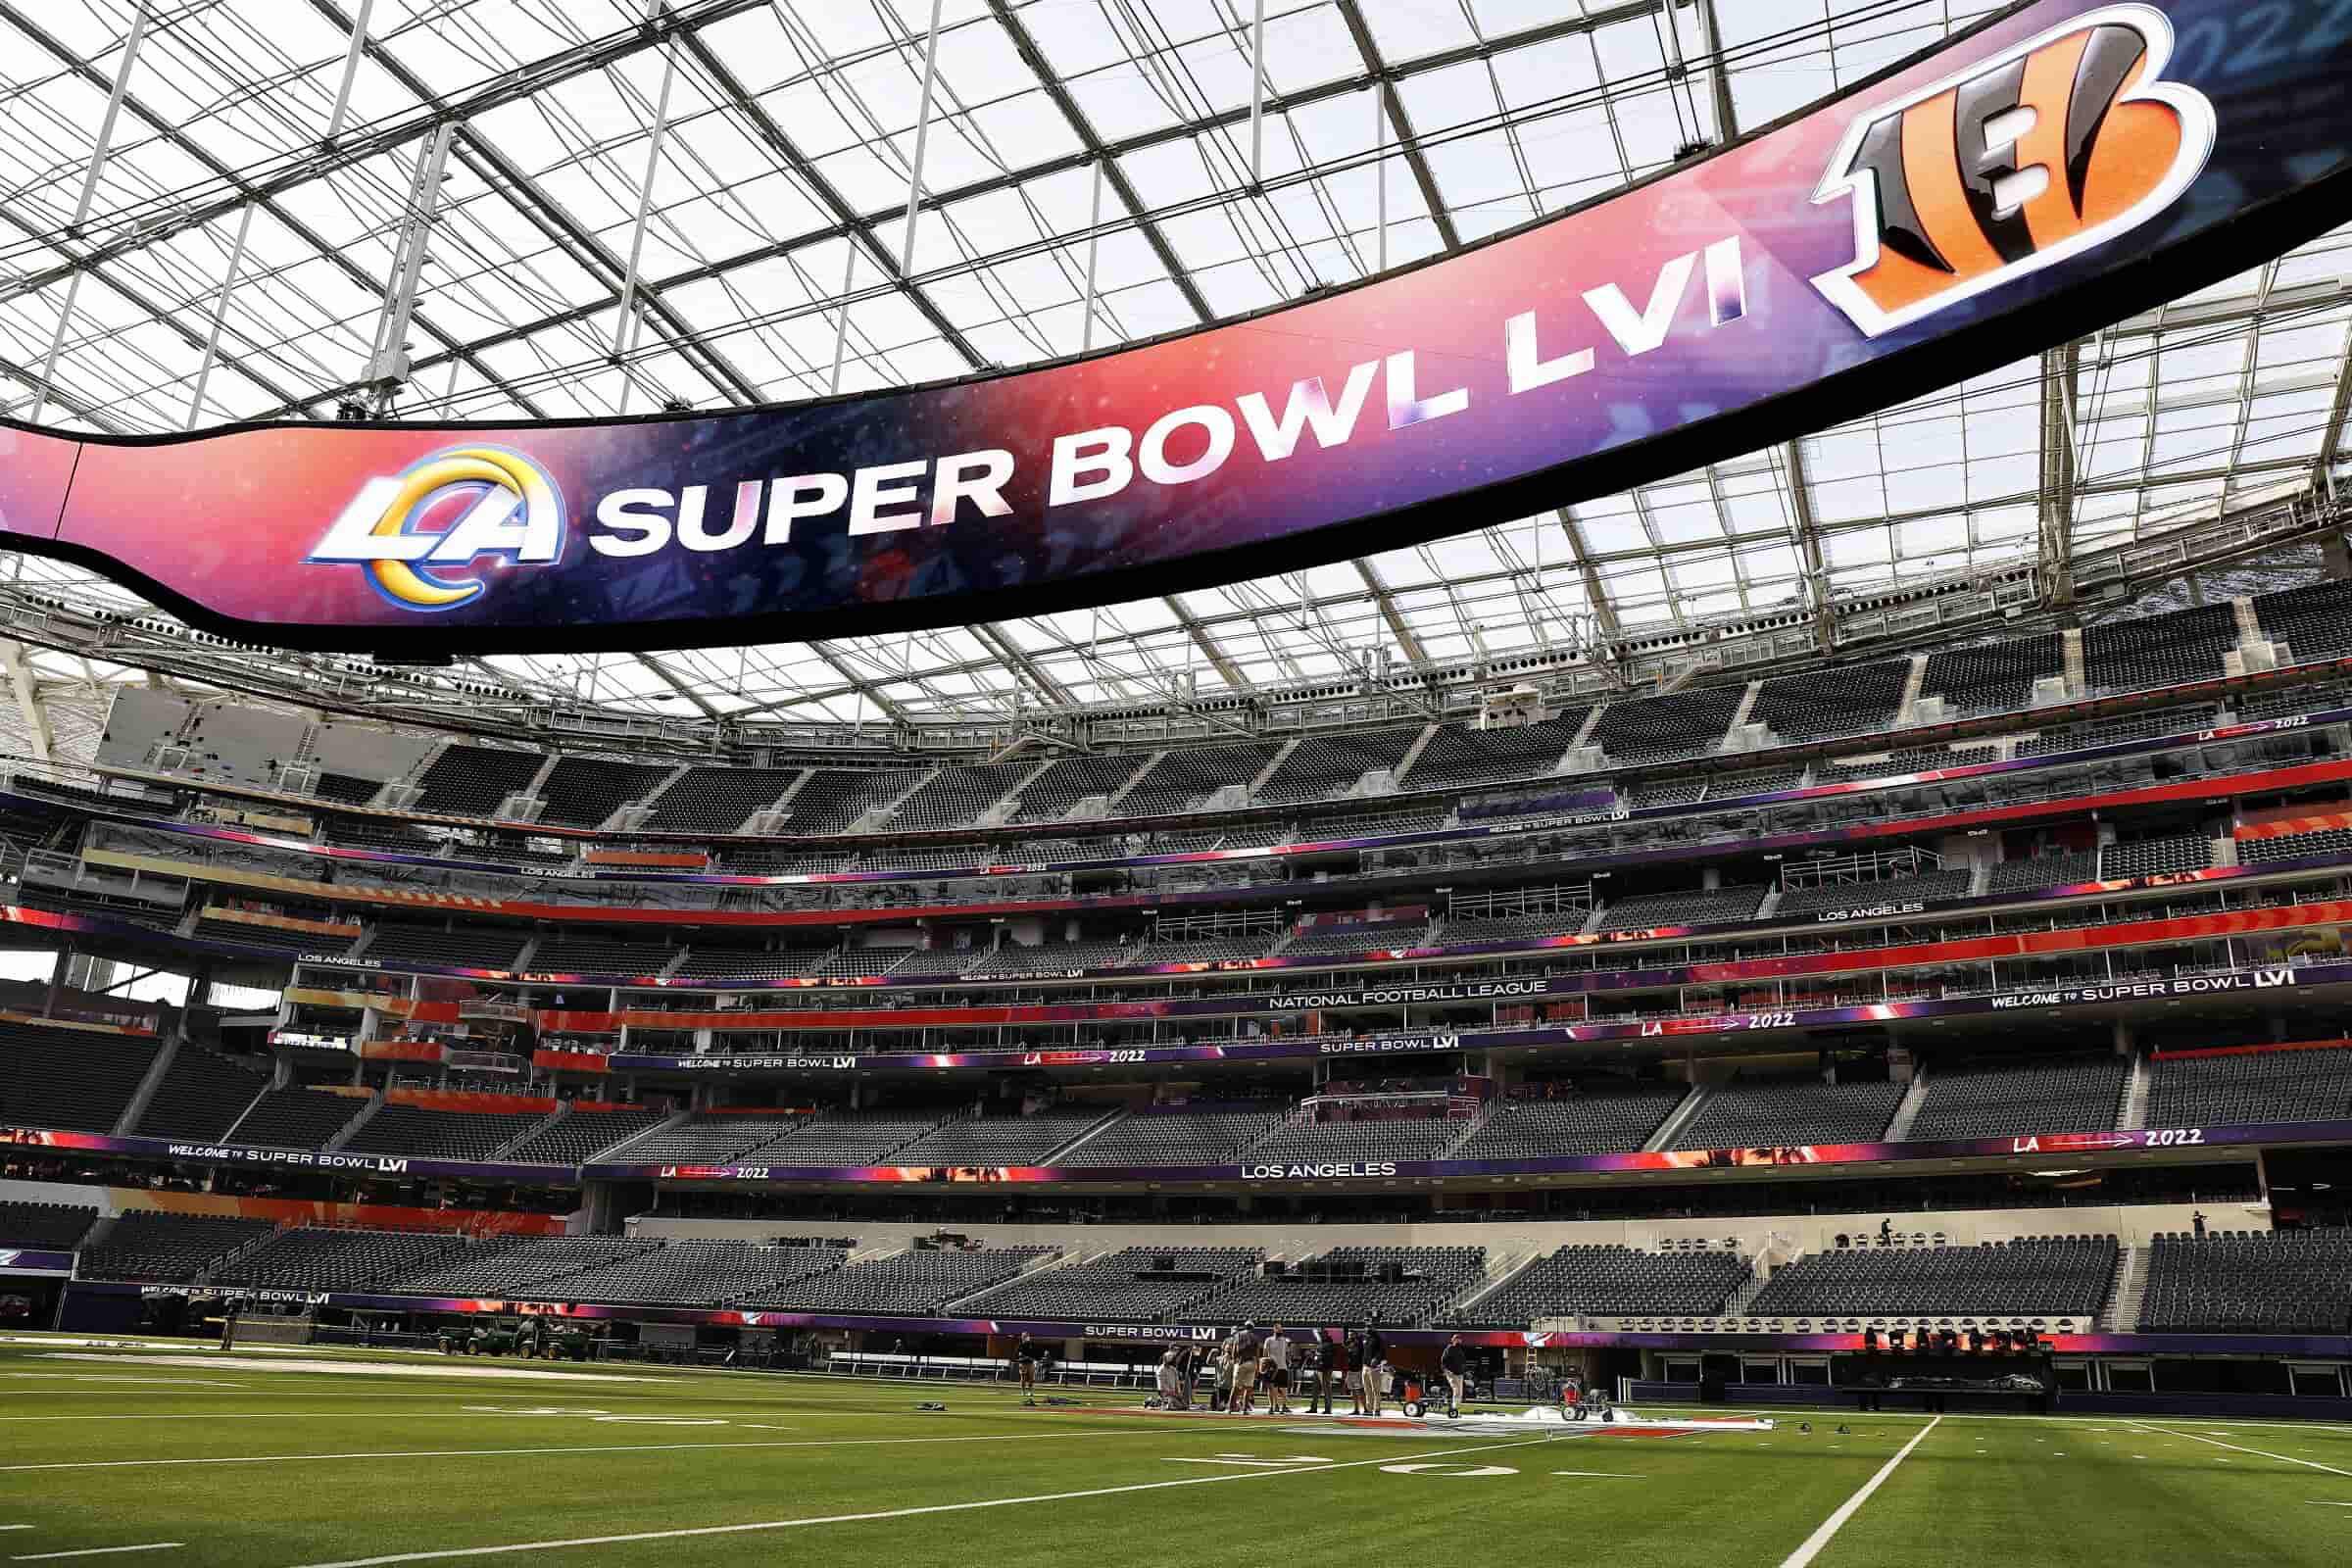 Here's a guide to everything you need to know about Super Bowl 2022 including super bowl halftime show live Streaming on Reddit.